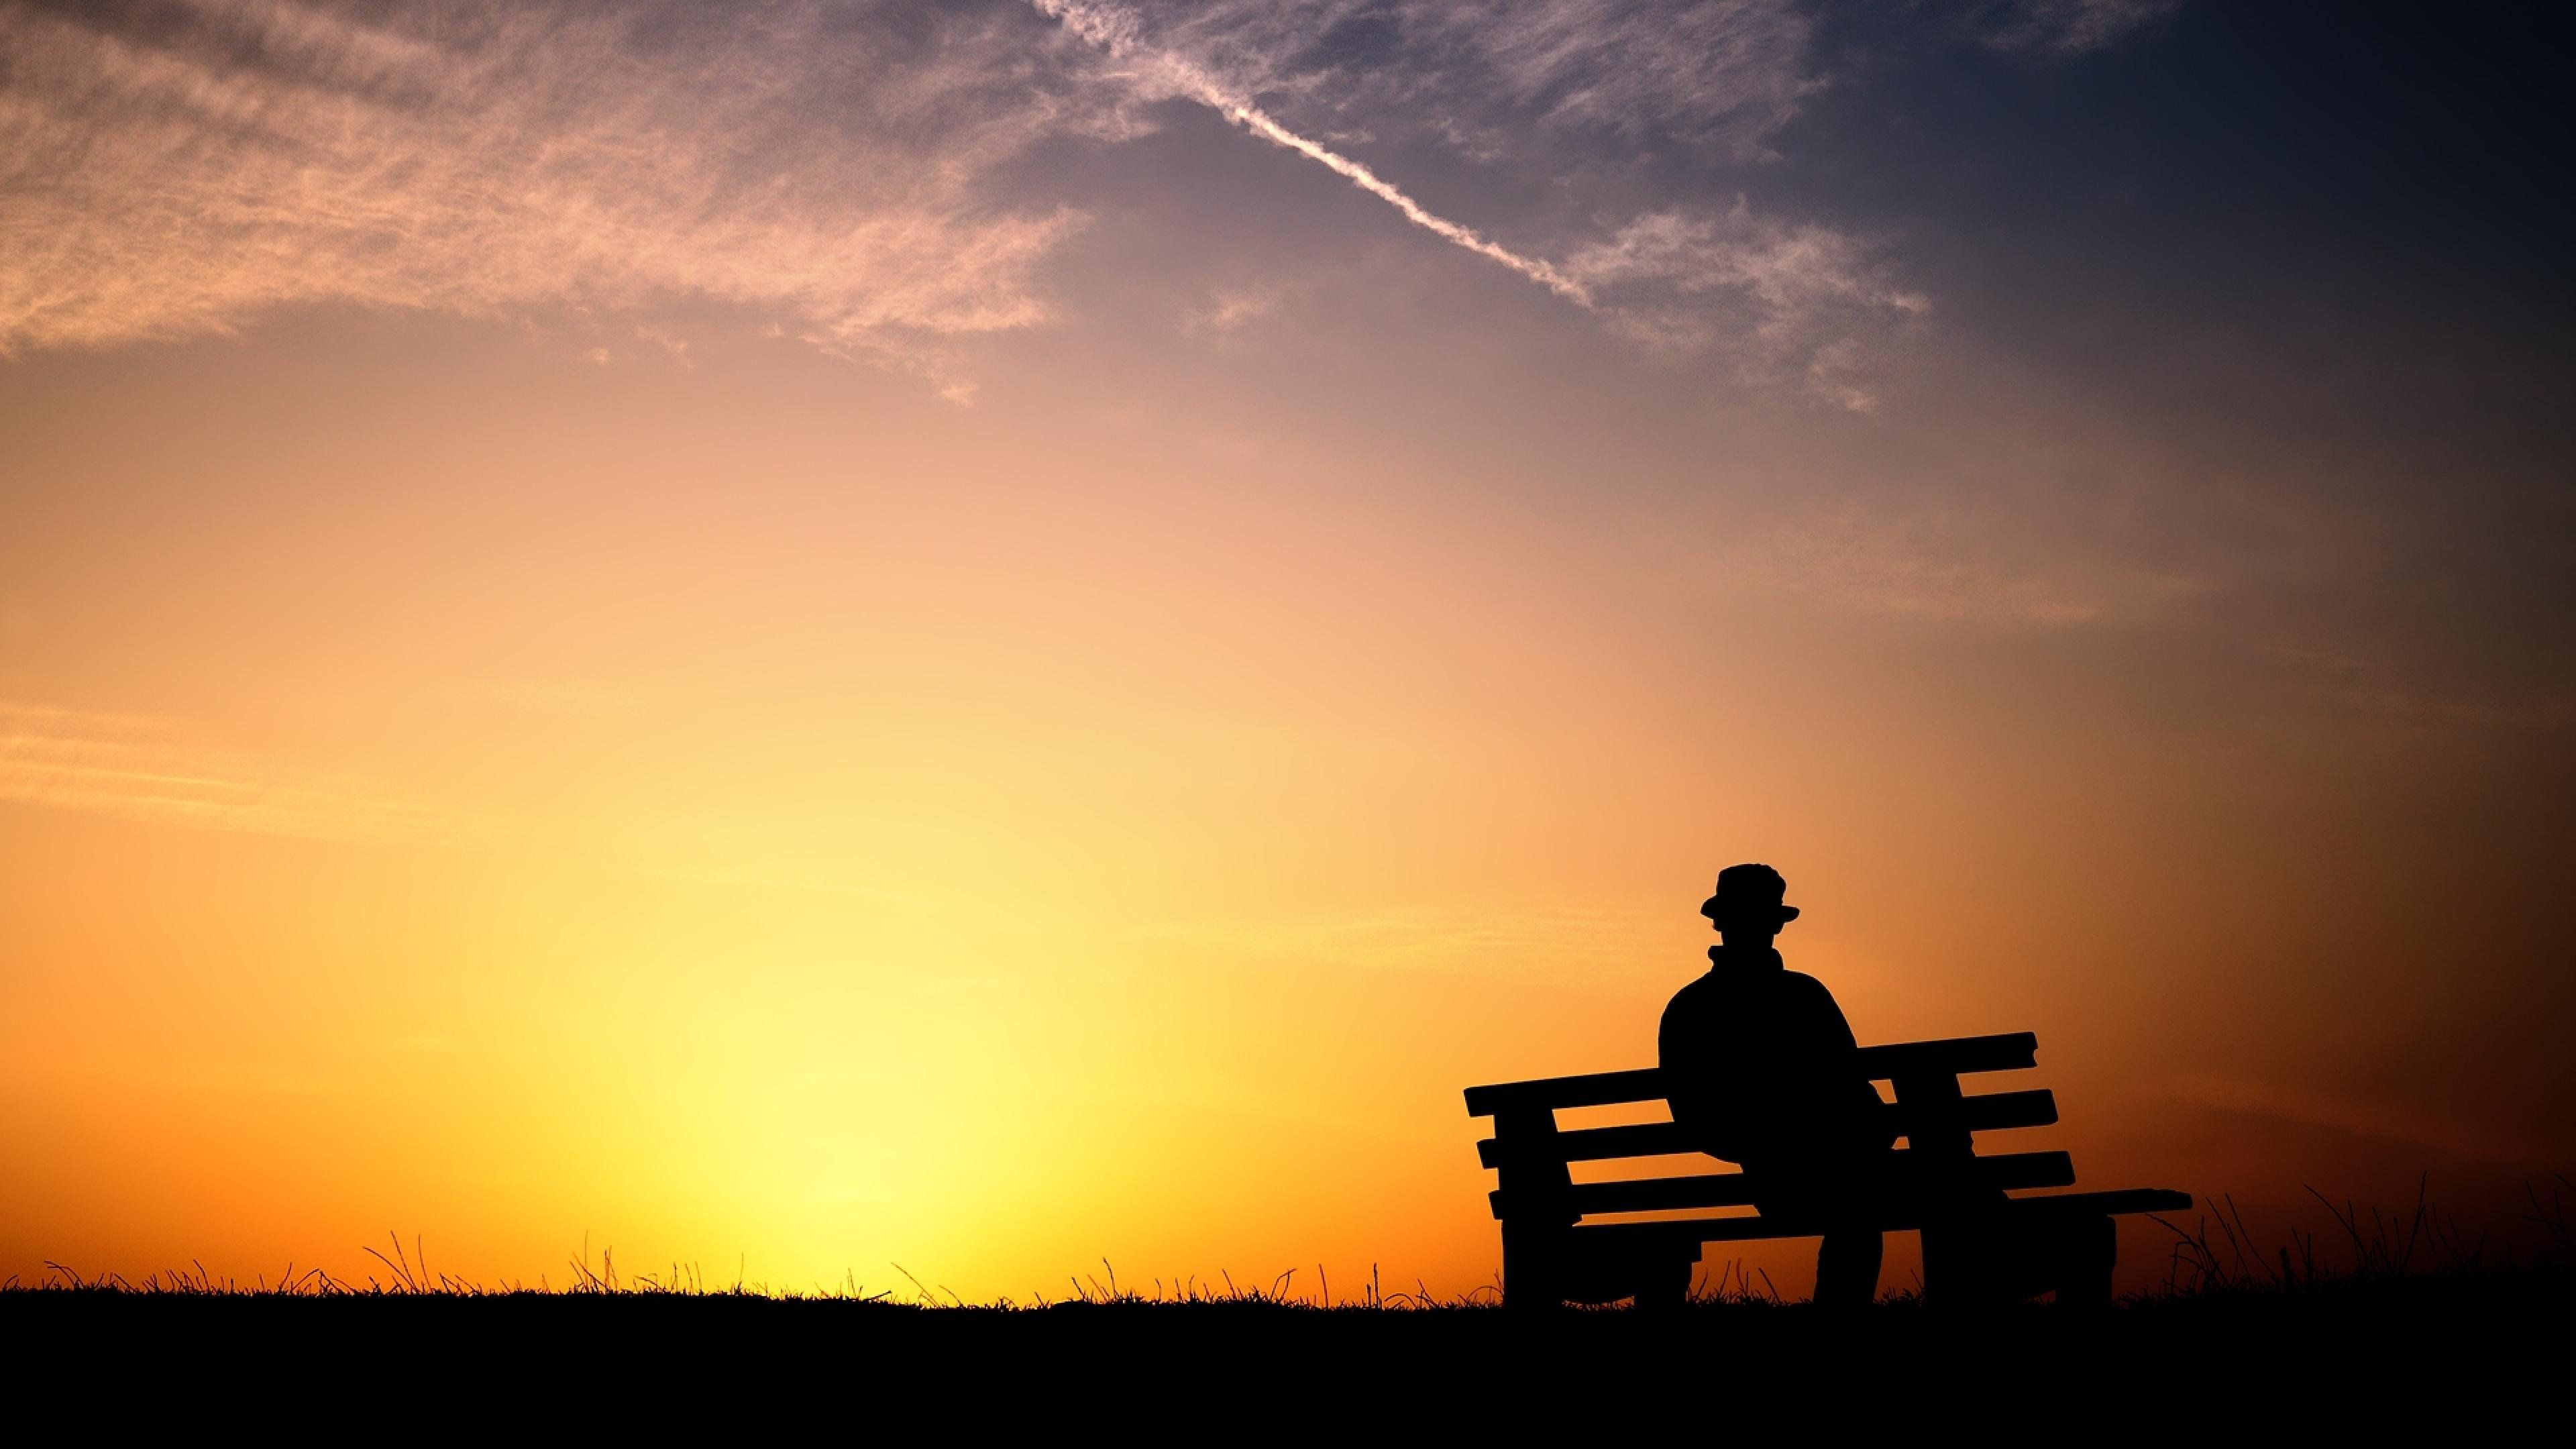 200+] Sitting Alone Pictures | Wallpapers.com